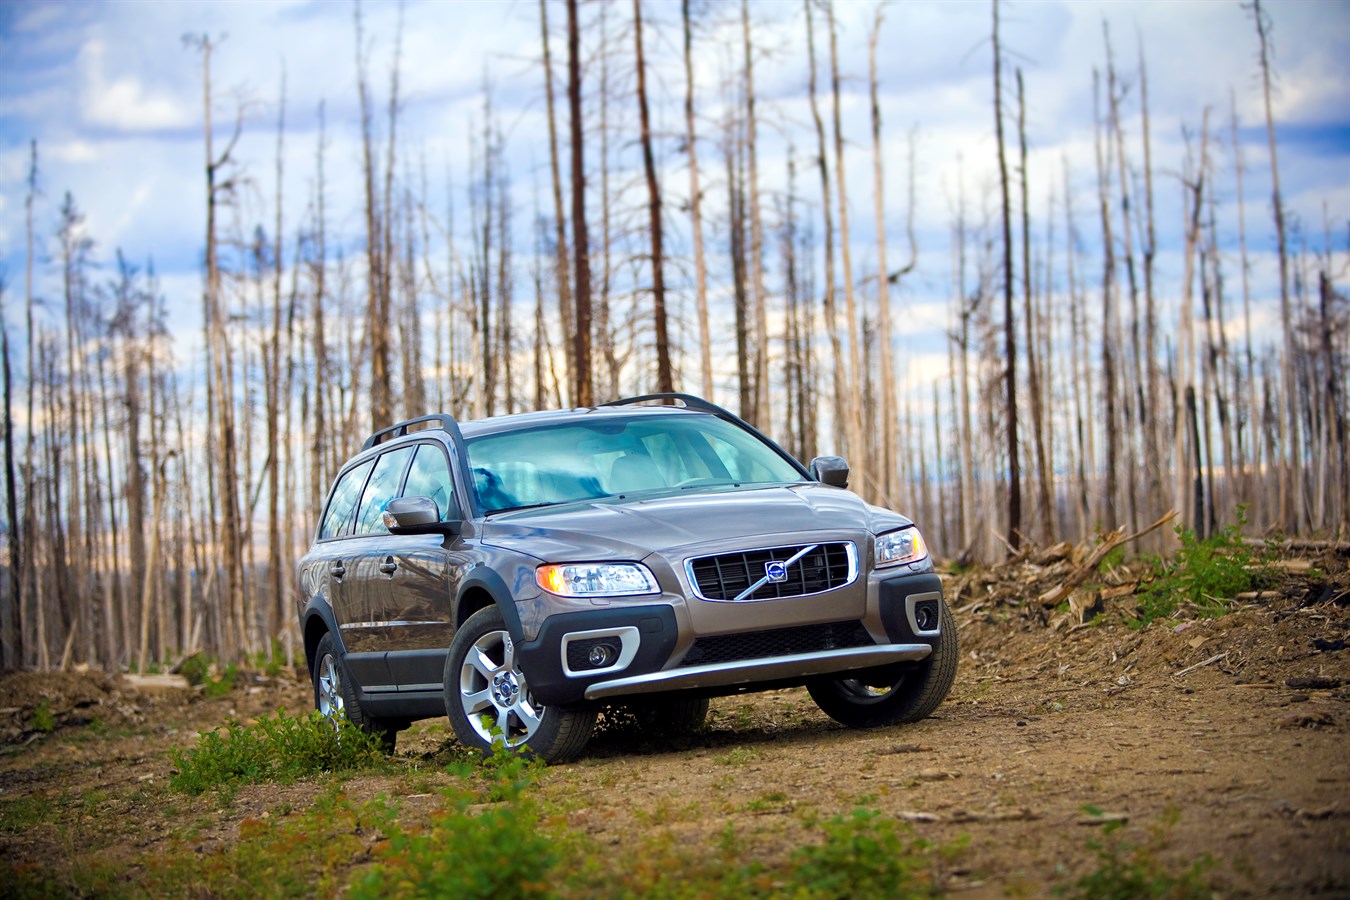 XC70 MY2008, exterior, front, forest